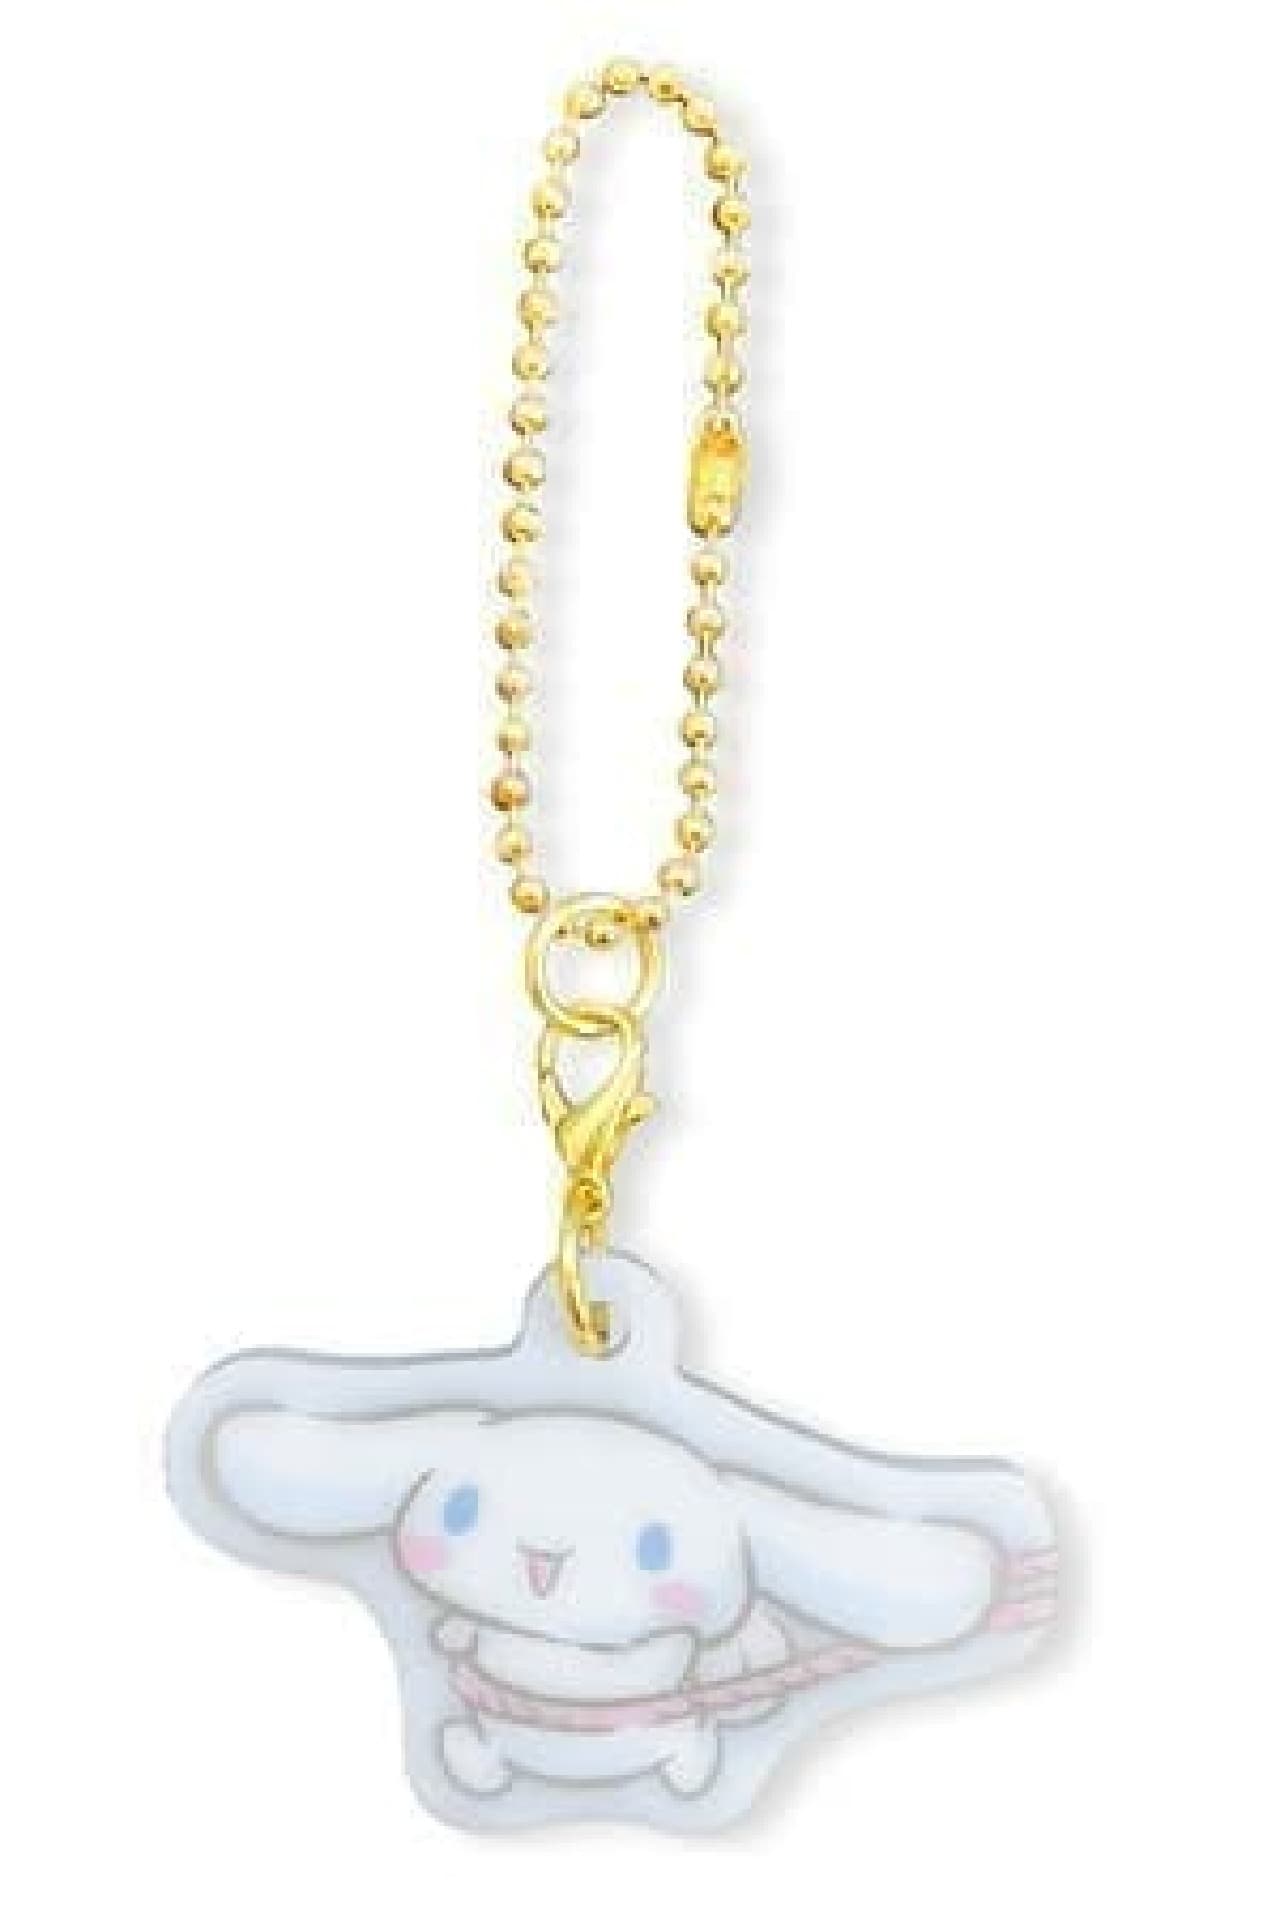 "Sanrio Characters Always Good Friends Series" New Item --Set of 3 Pompompurin Keychains